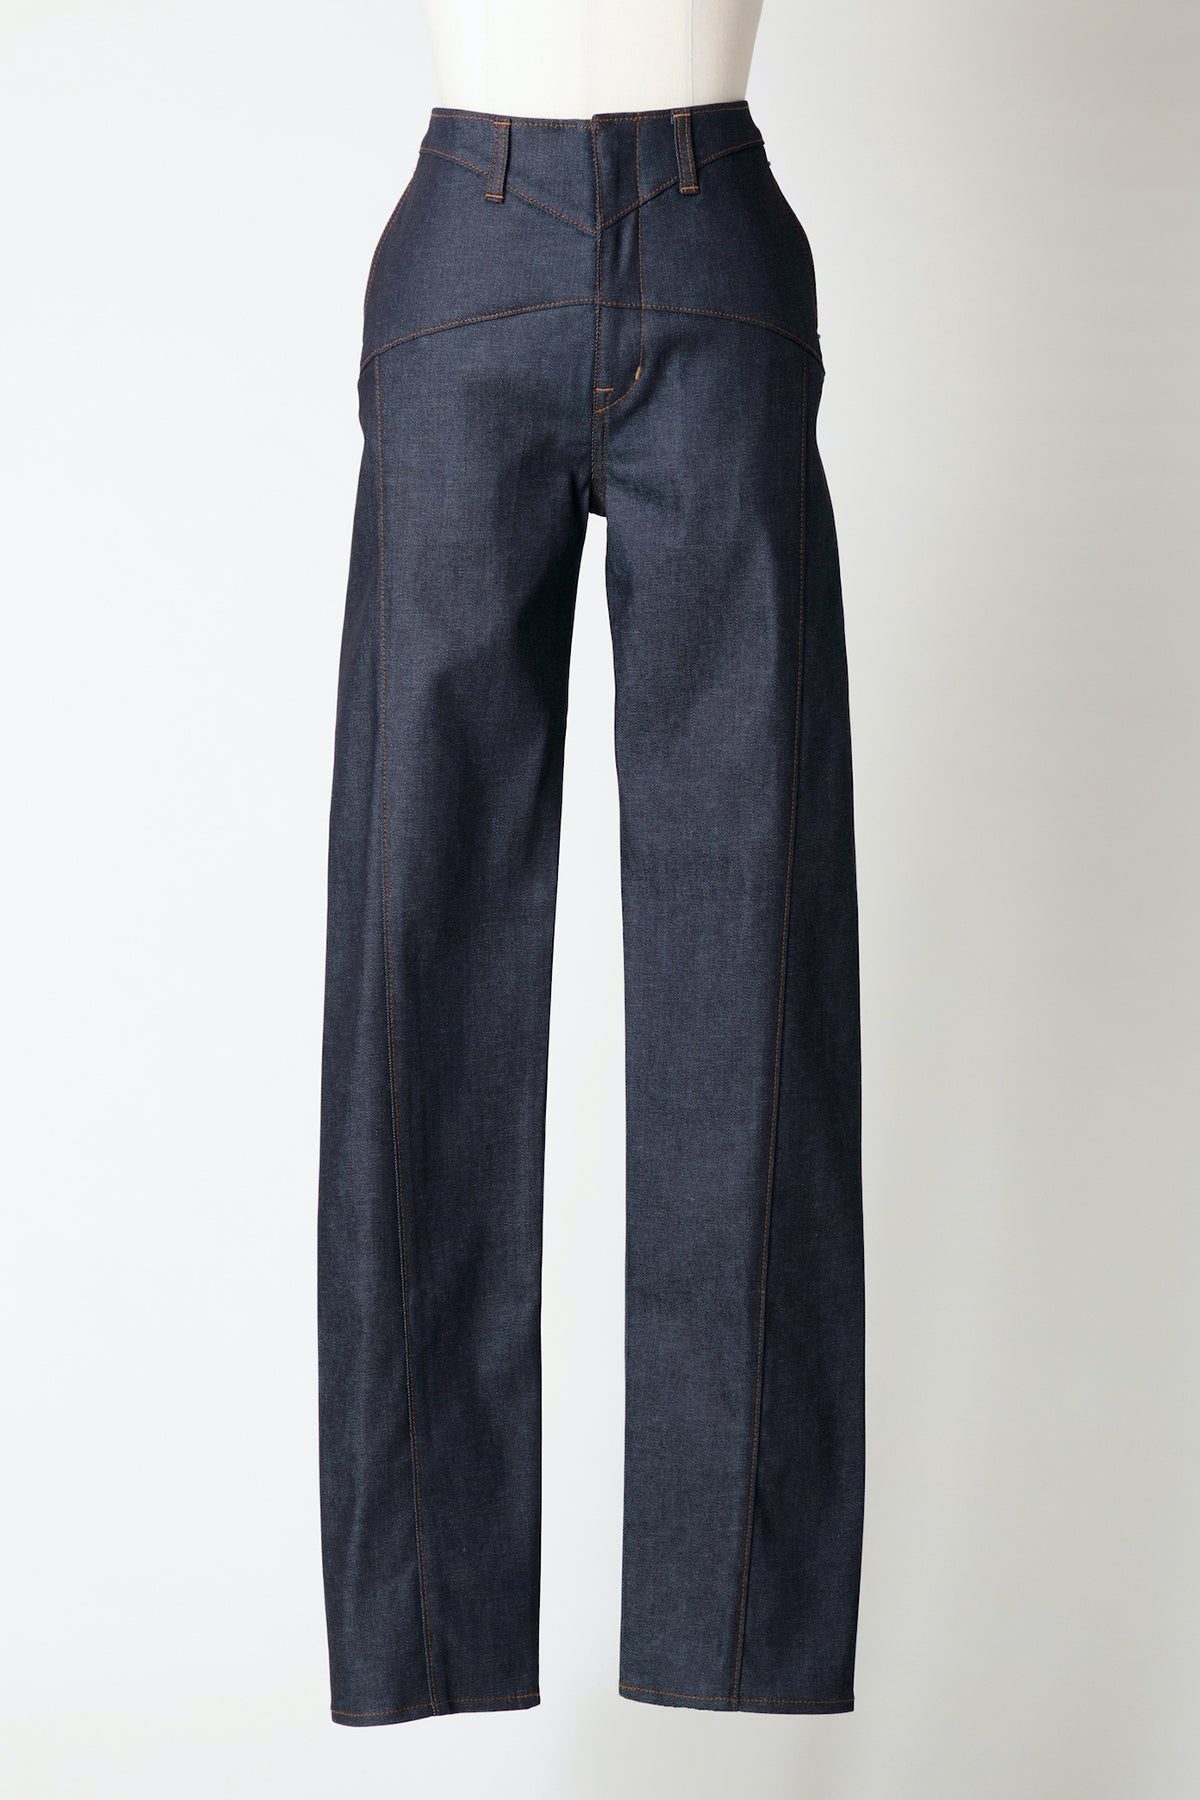 No.FTC212-0602 12oz HIGH-RISE COATED JEANS